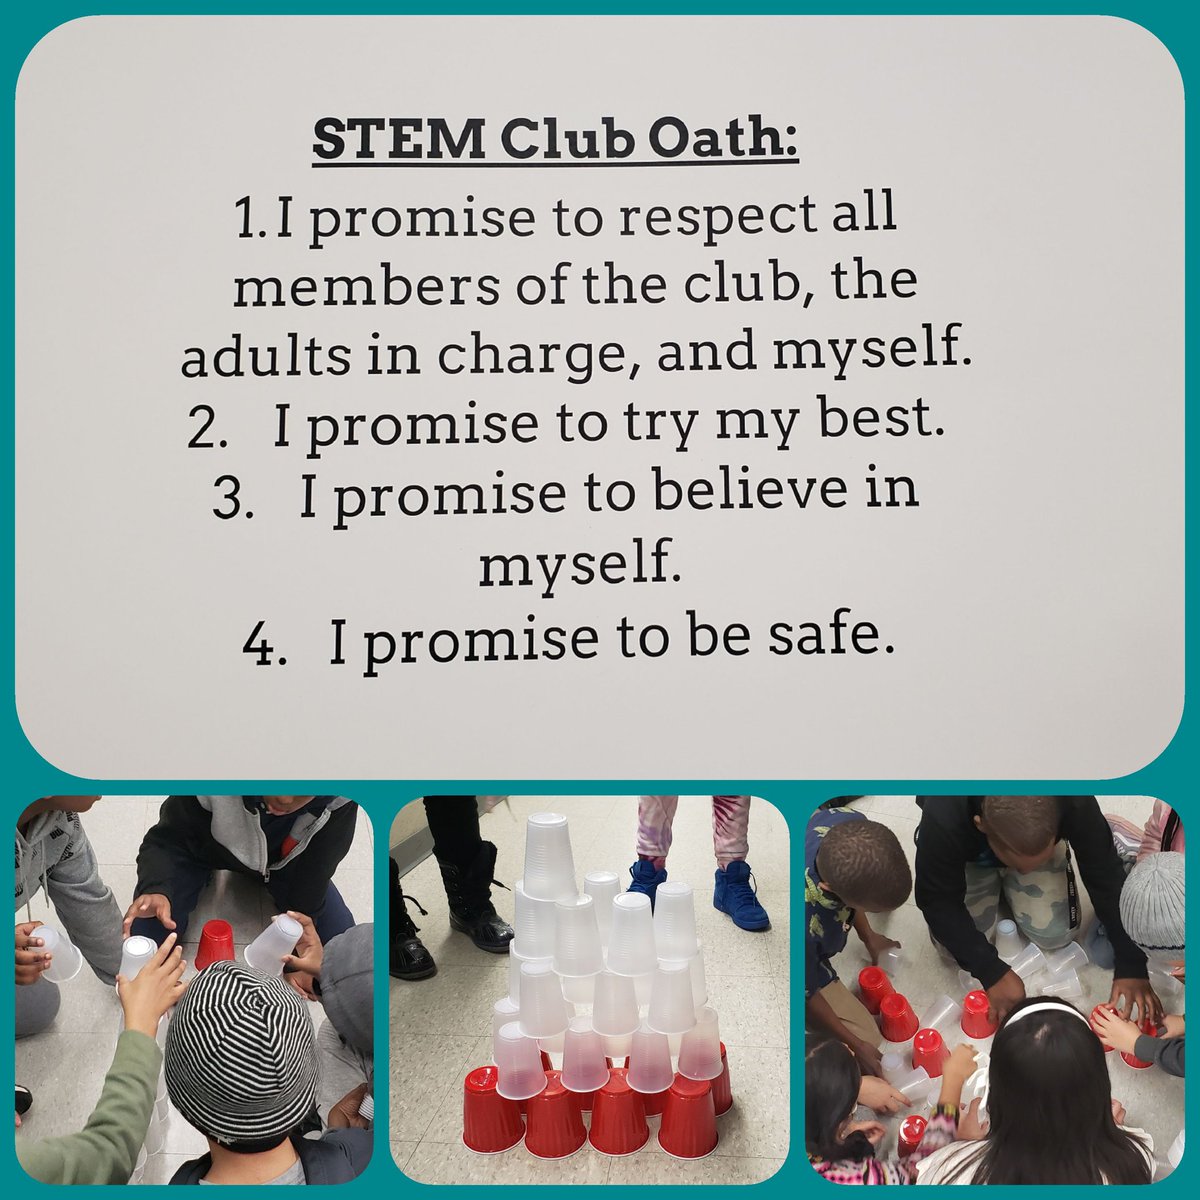 @brookhaven_ps @kwamelennon Brookhaven's STEM club meets once a week under the guidance of our amazing VP Ms. Grande. This week's challenge: build the tallest structure using cups.🤗